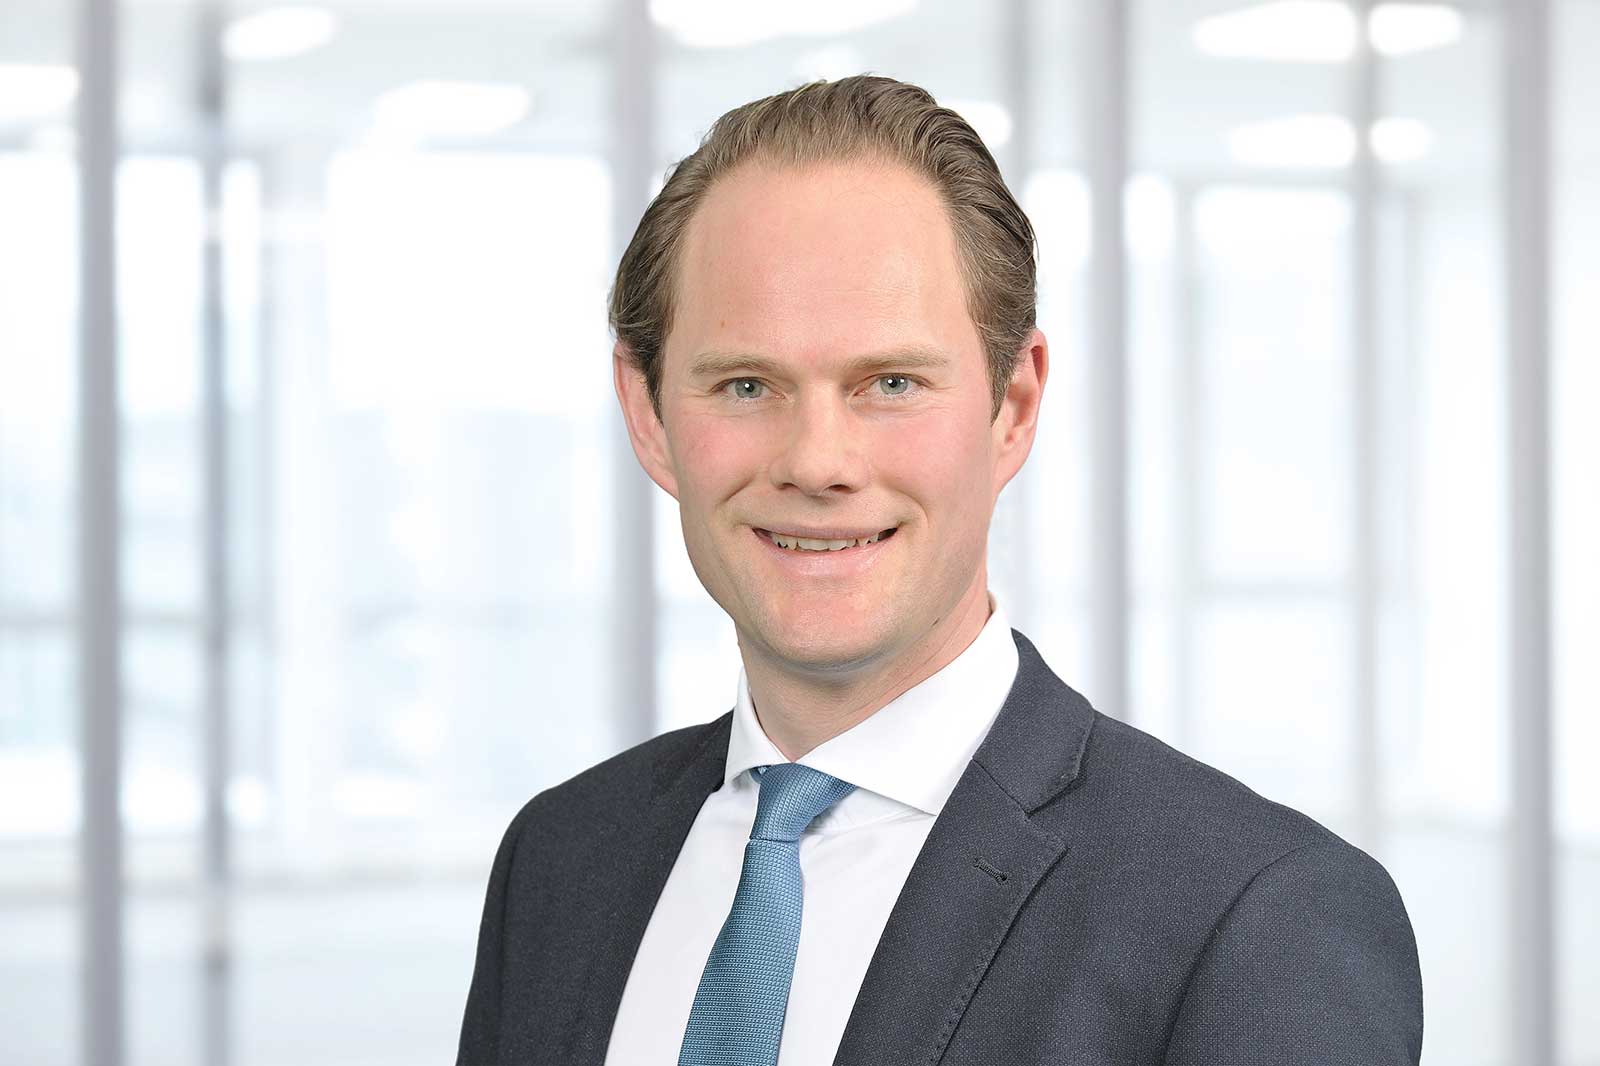 Steffen Kanitz, Member of the Executive Board, Nuclear (CTO), RWE Power AG